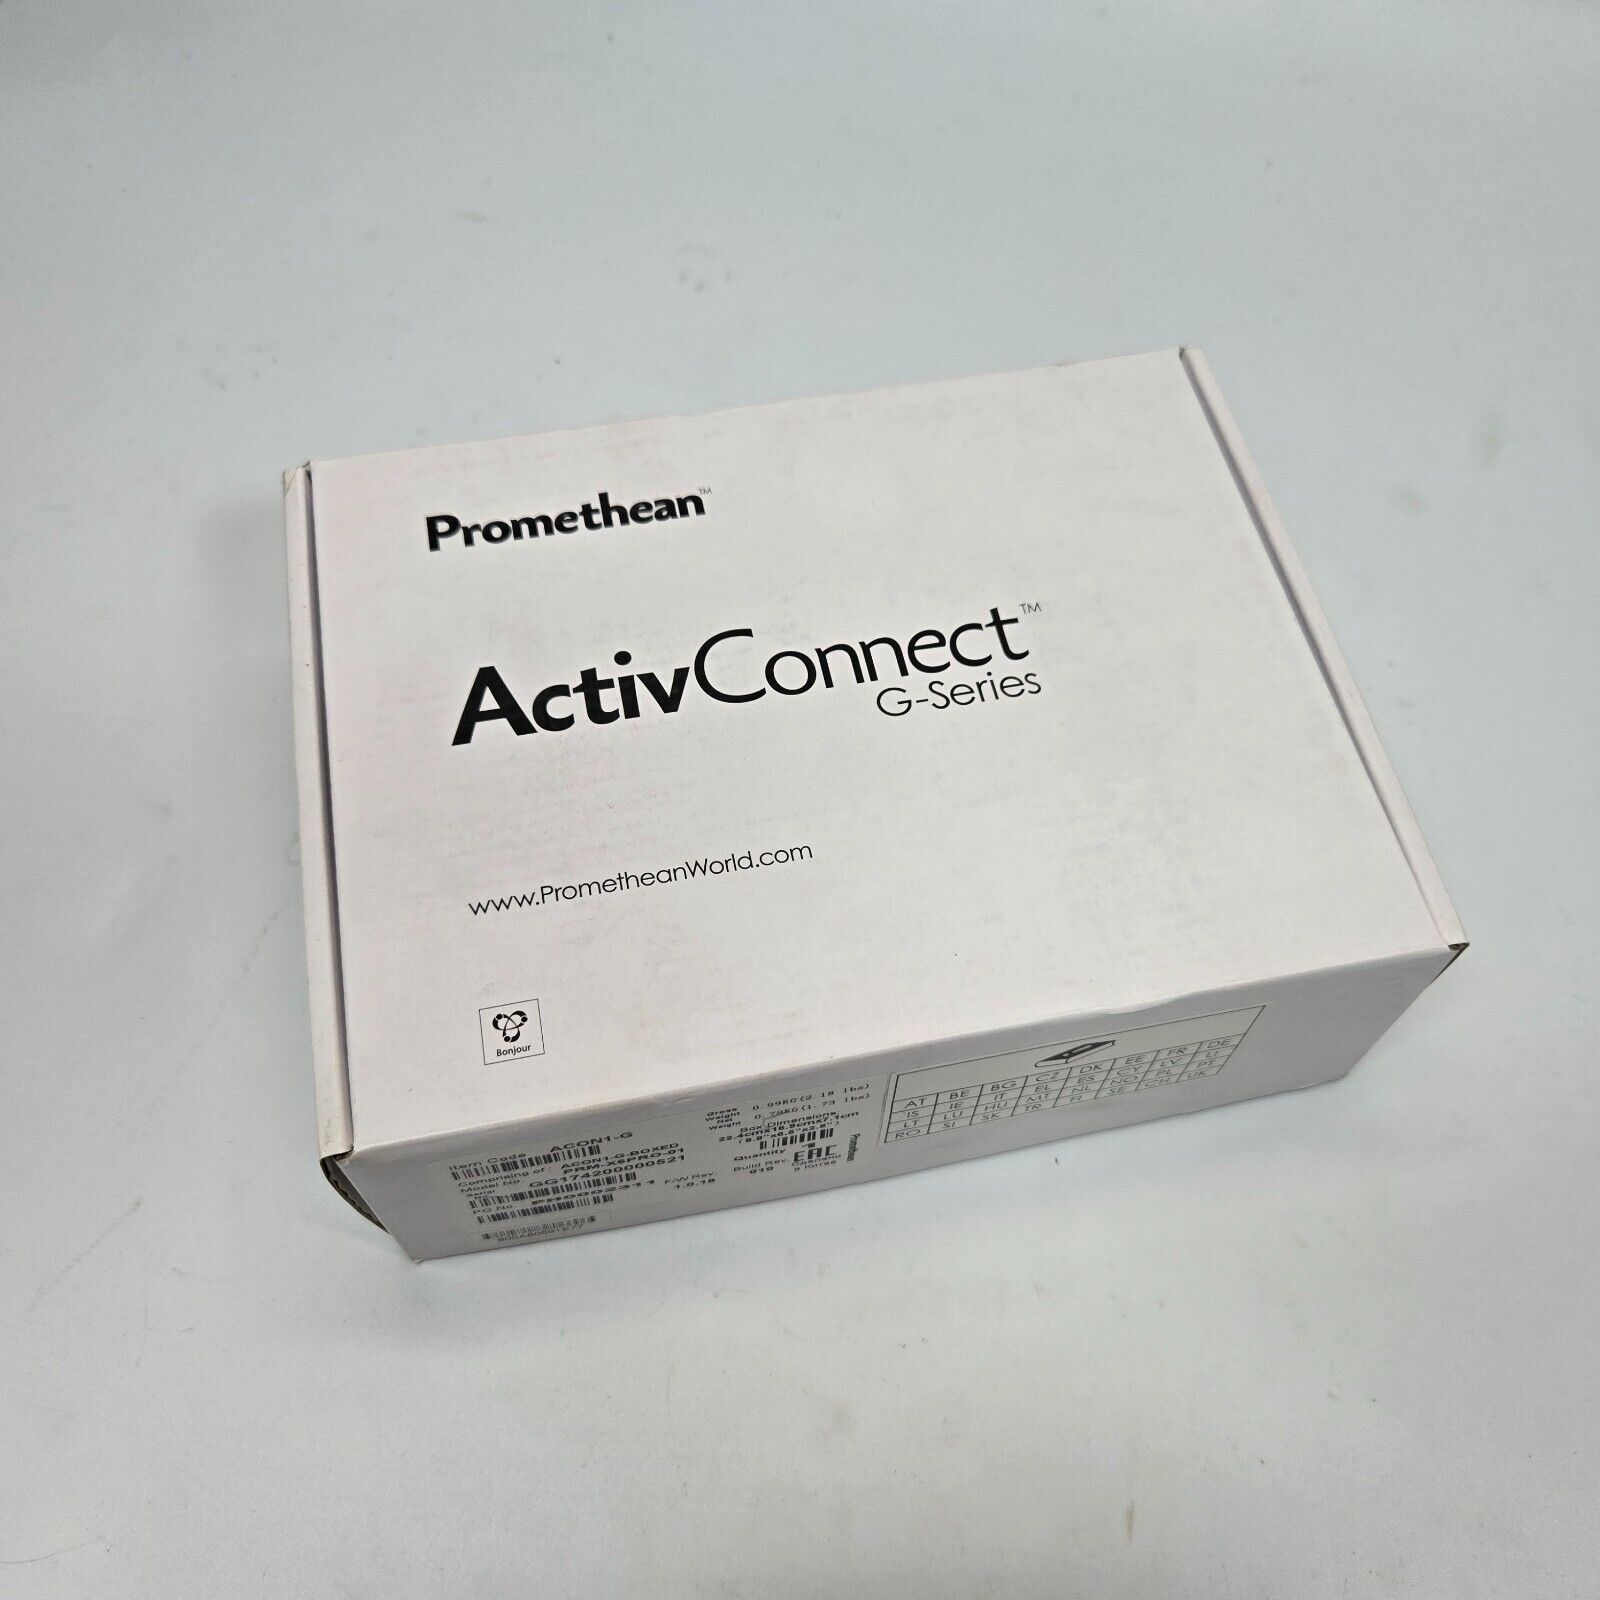 Lot of 4 NEW Promethean ActivConnect ACON1-G (PRM-X6PRO-01) Streaming Adapter